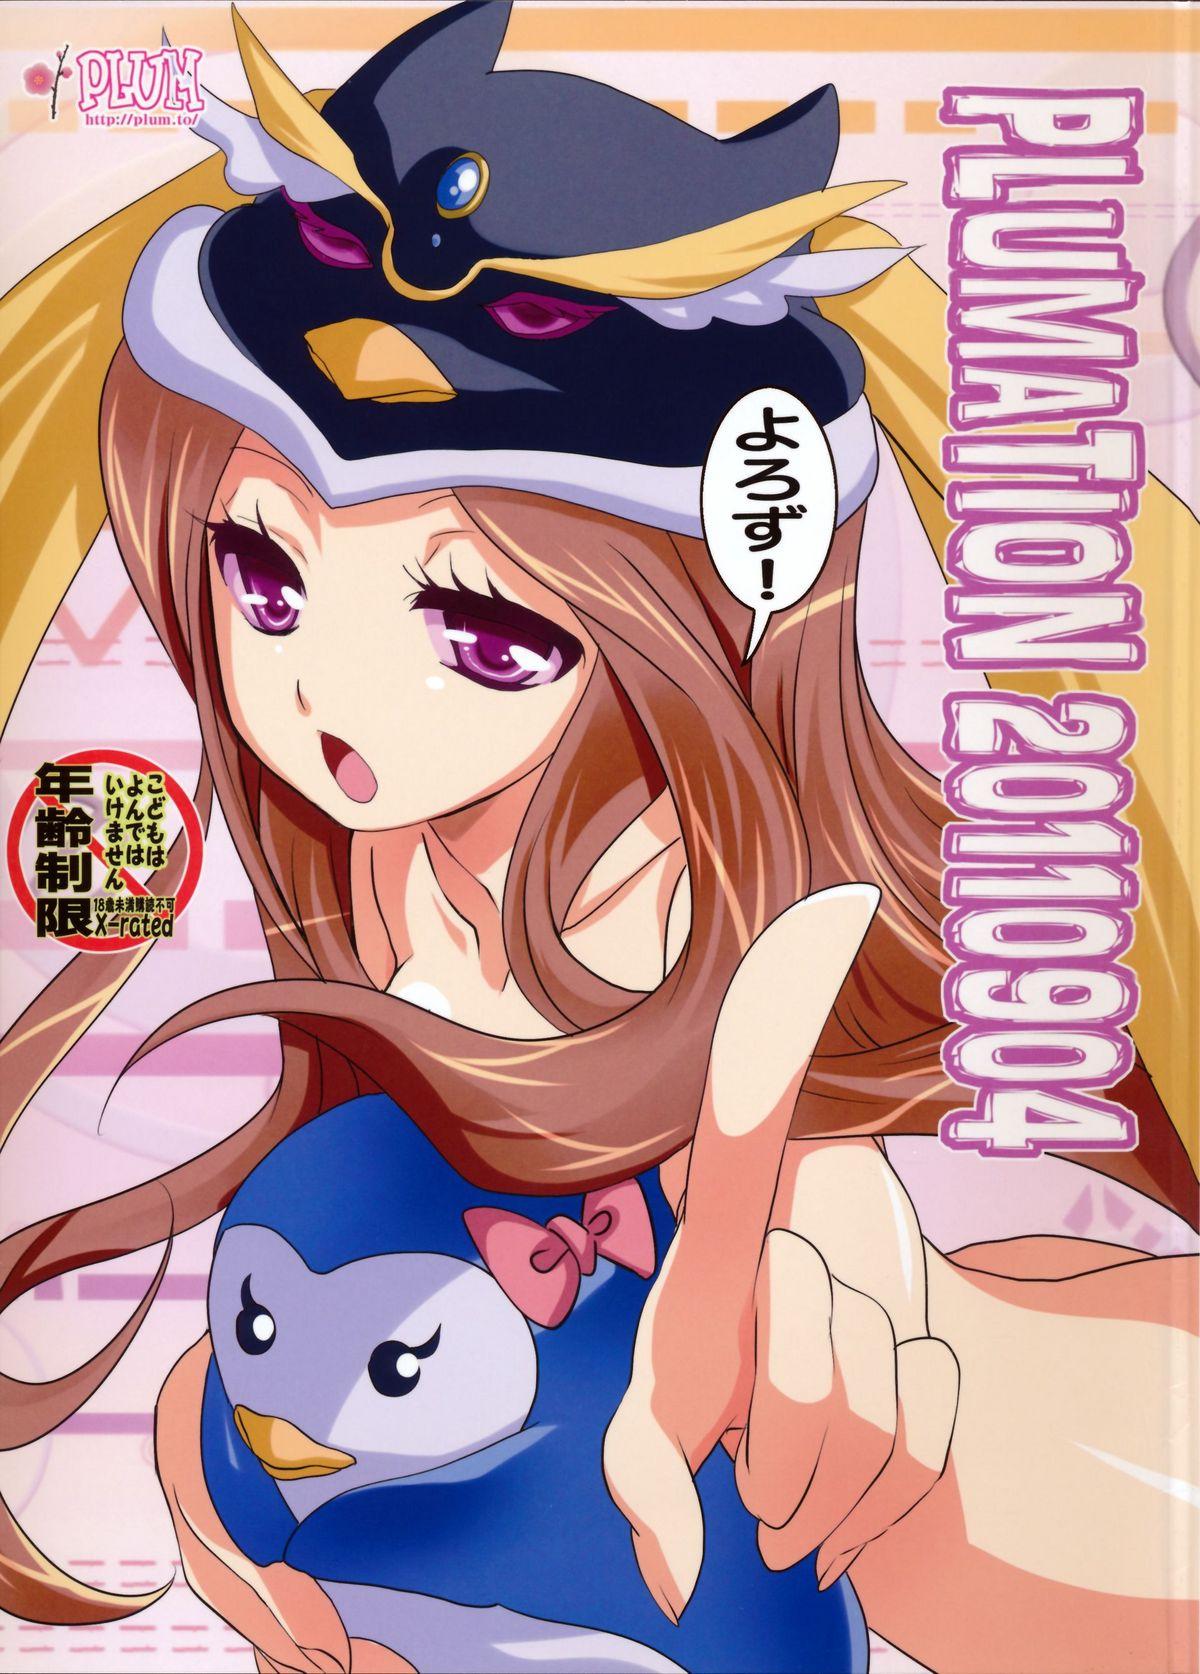 Punished PLUMATION 20110904 - Mawaru penguindrum Cum Swallowing - Picture 1